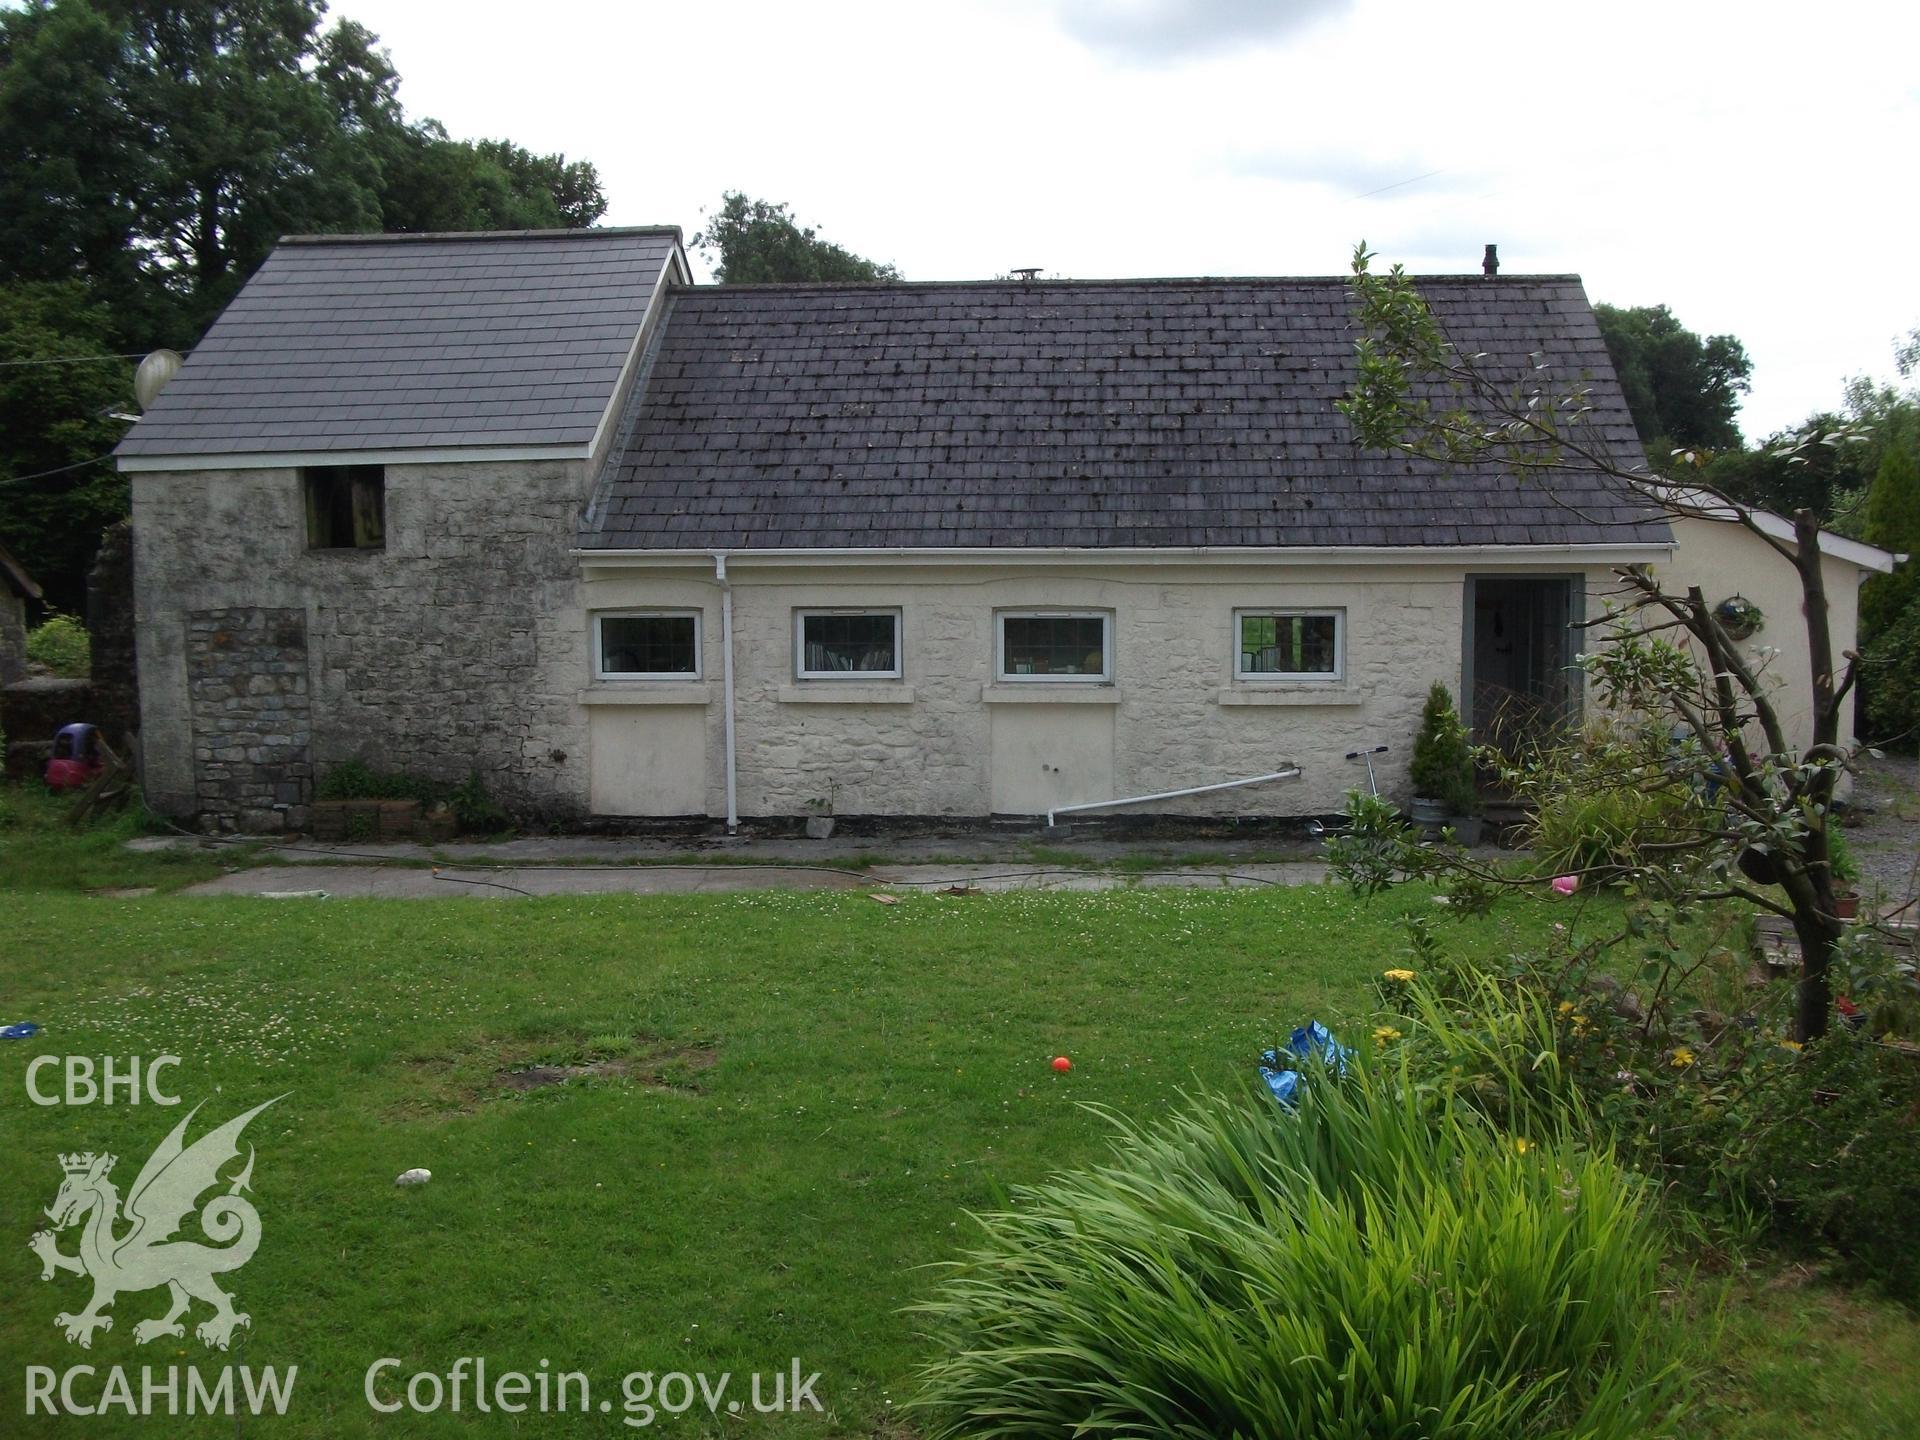 Photograph showing exterior rear elevation of cottage and attached building at Pant-y-Castell, Maesybont, Photographed by Mark Waghorn to meet a condition attached to planning application.